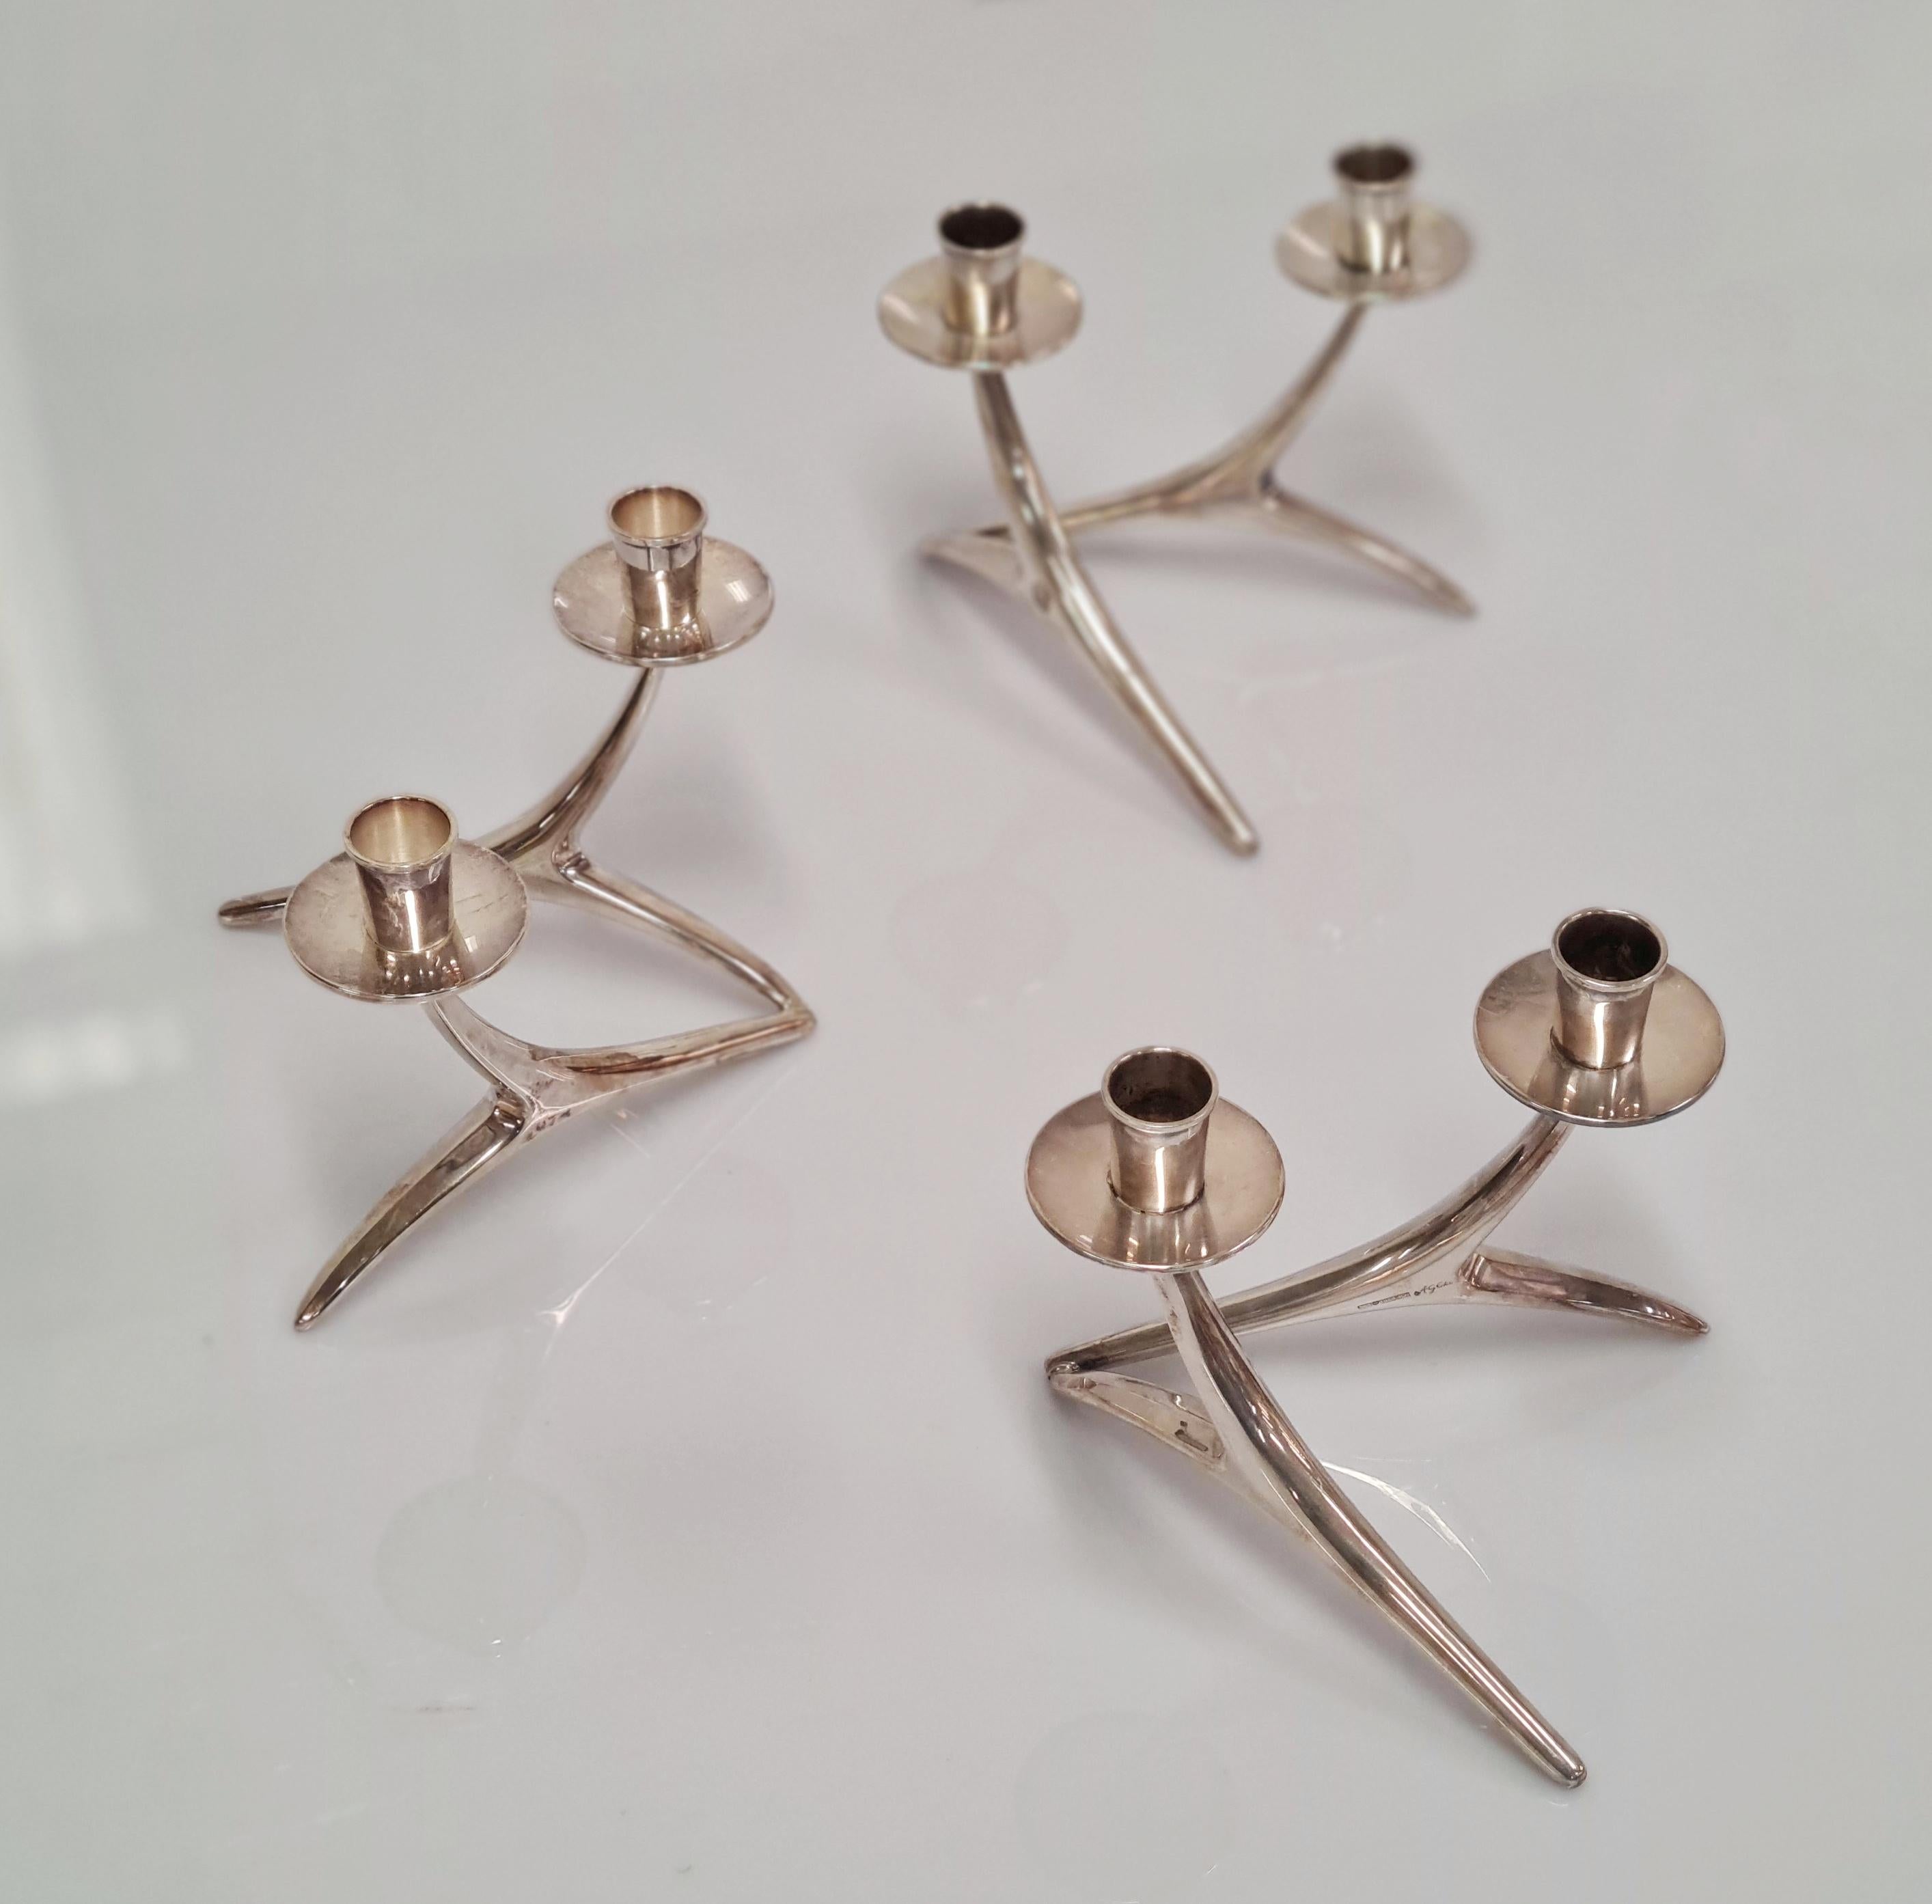 A set of 3 very beautiful candleholders designed by Anna Greta-Eker. These pieces are a part of a very well known series of candle holders in different sizes and shapes but in this same distinctive design by Anna Greta-Eker. These 3 in particular